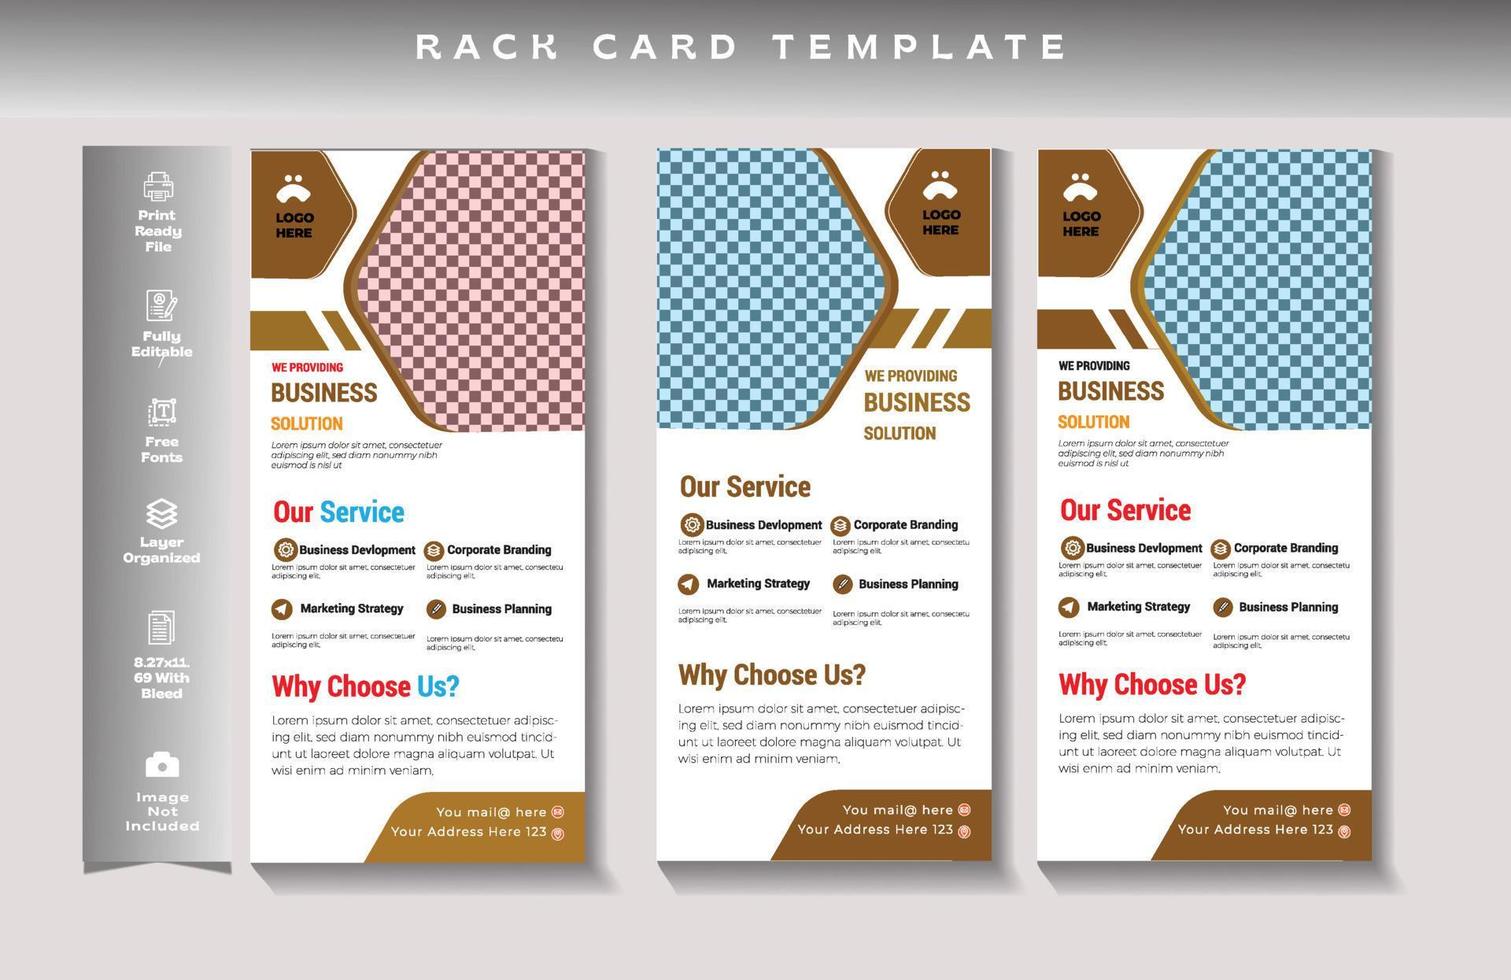 Rack card template or  dl flyer design,  corporate flyer template for your business. vector